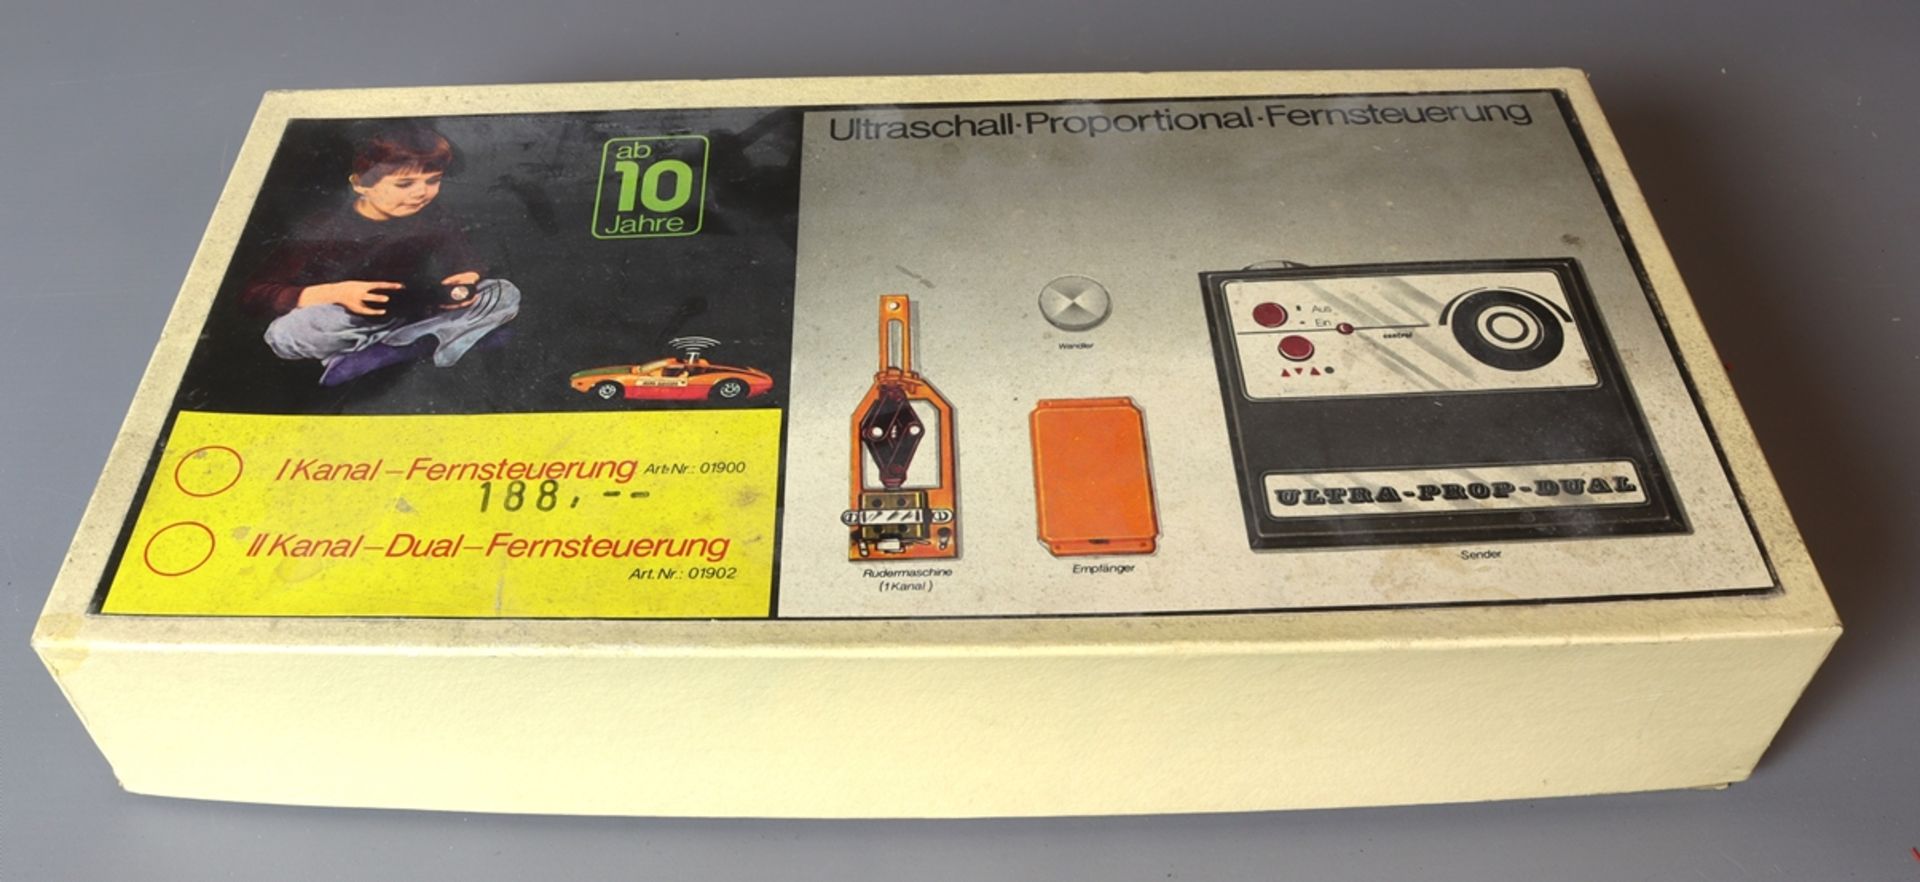 Remote control for GDR toy cars, ultrasonic proportional remote control, GDR 1949-1989 - Image 3 of 3